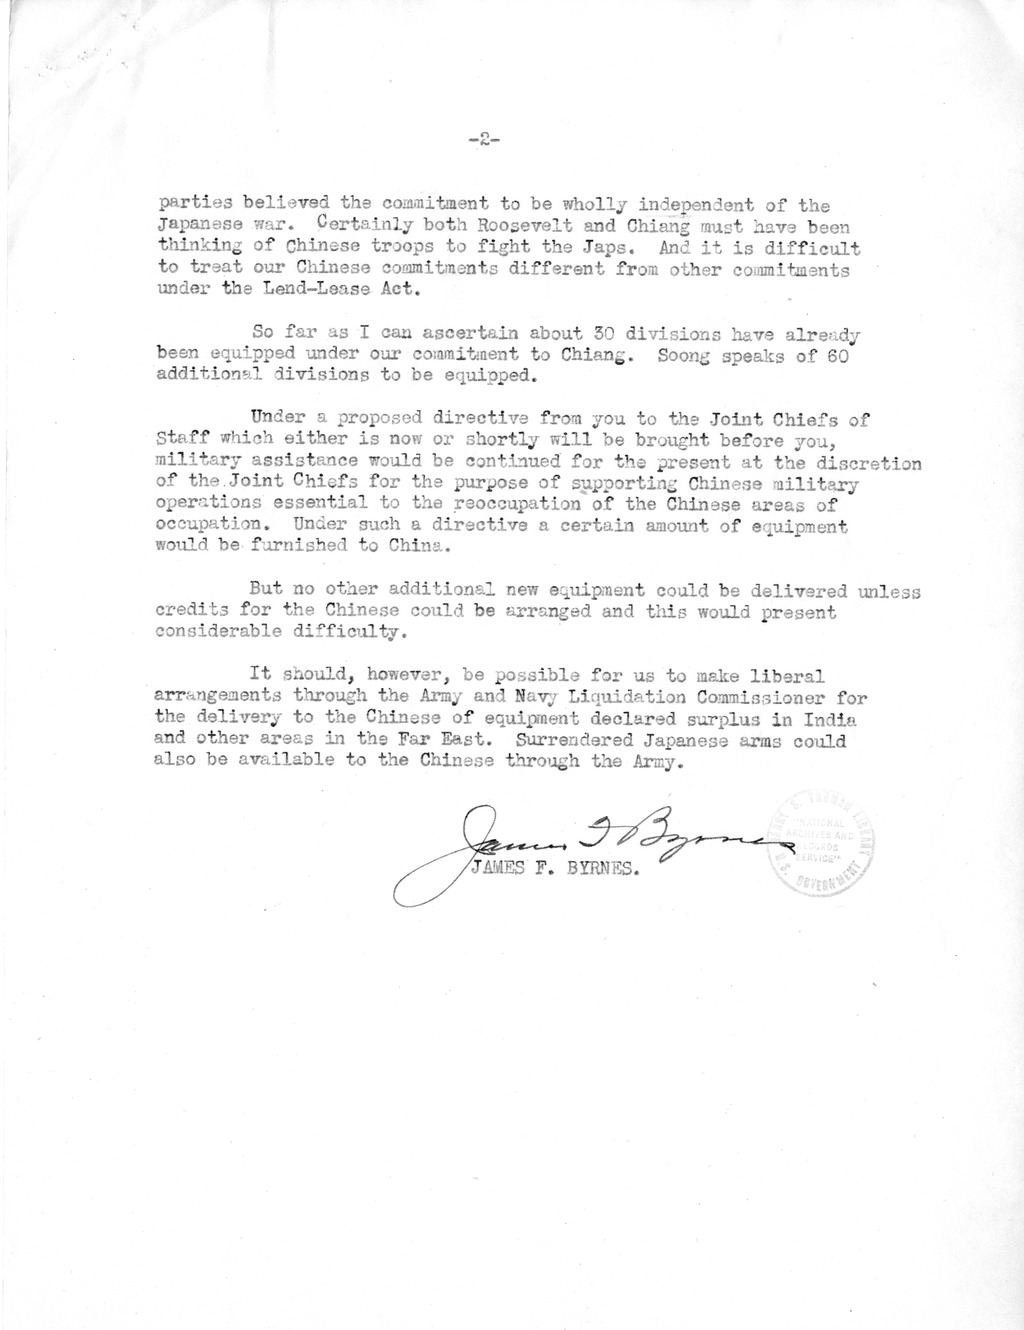 Memoranda from Secretary of State James F. Byrnes and George Elsey to President Harry S. Truman